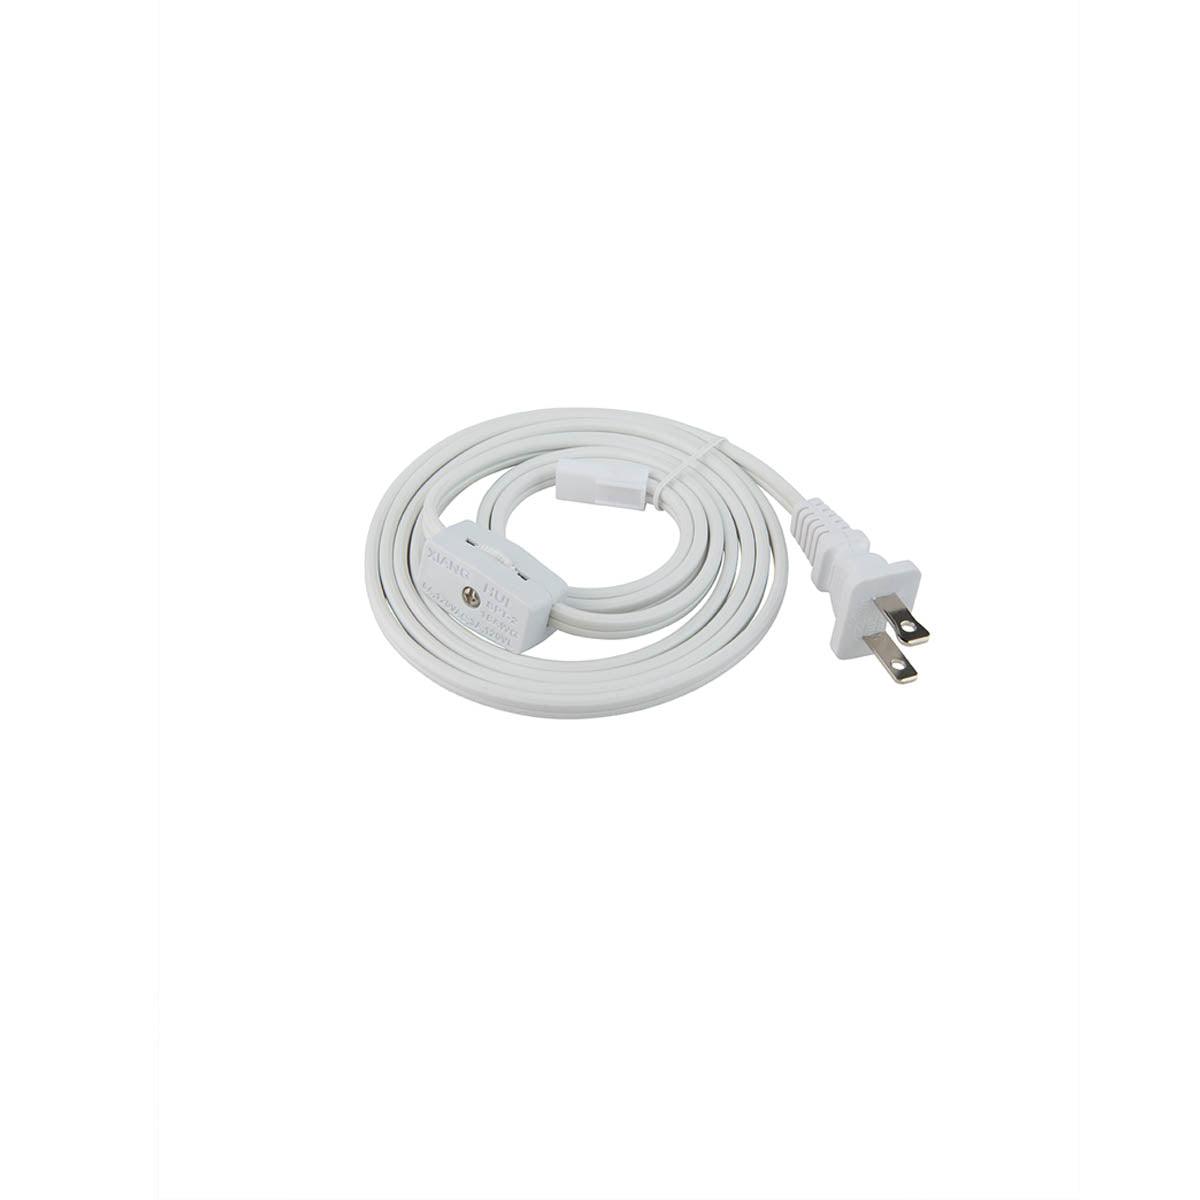 White Power Cord for 3-CCT Puck Light with on/off switch